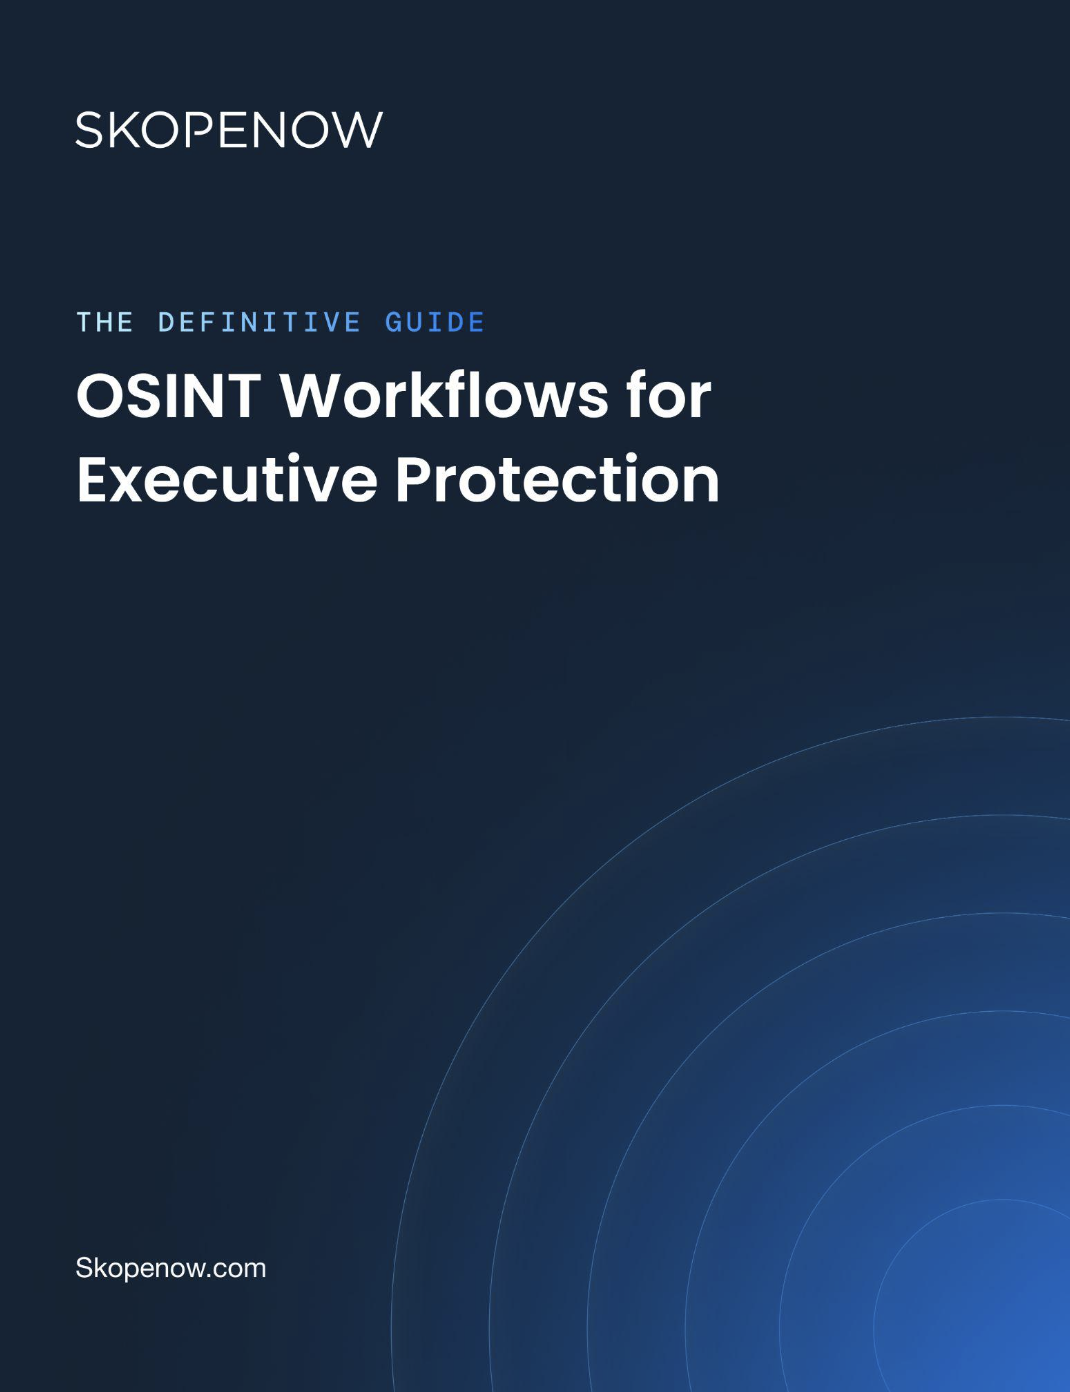 The Definitive Guide: OSINT Workflows for Executive Protection